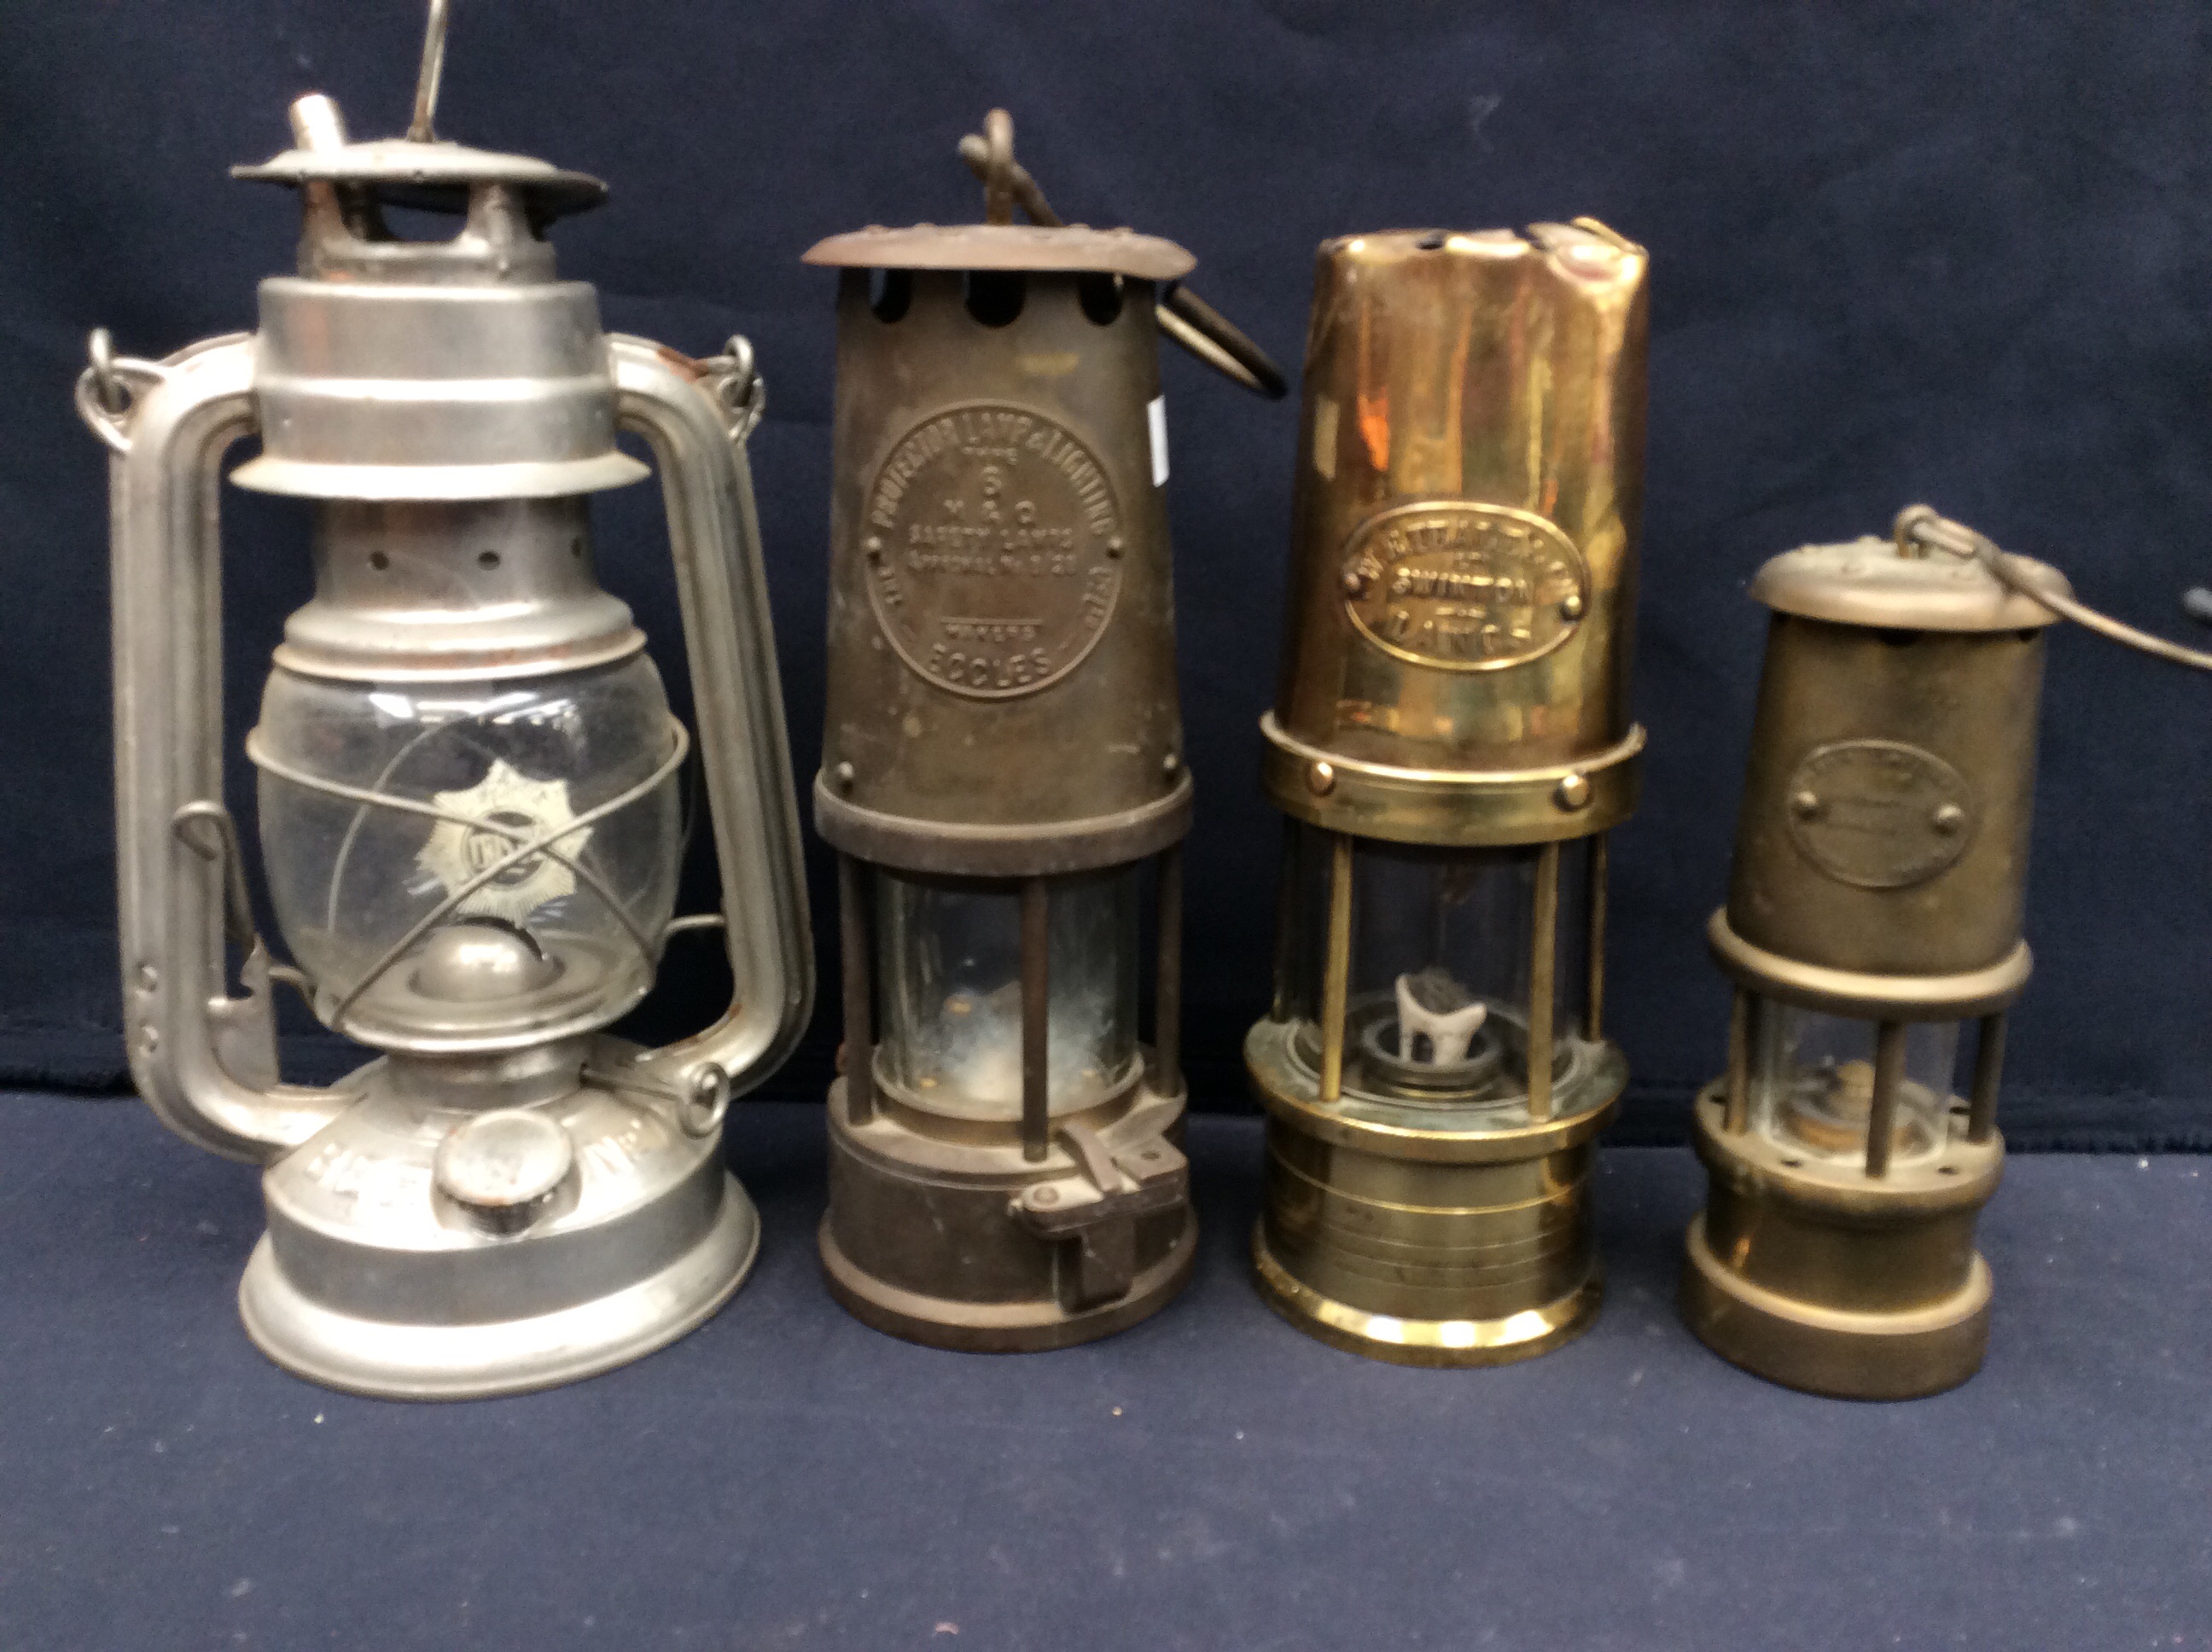 An Eccles miners lamp, small lamp and Limelight Company lamp, W.E Teale & Co lamp and an oil lamp.